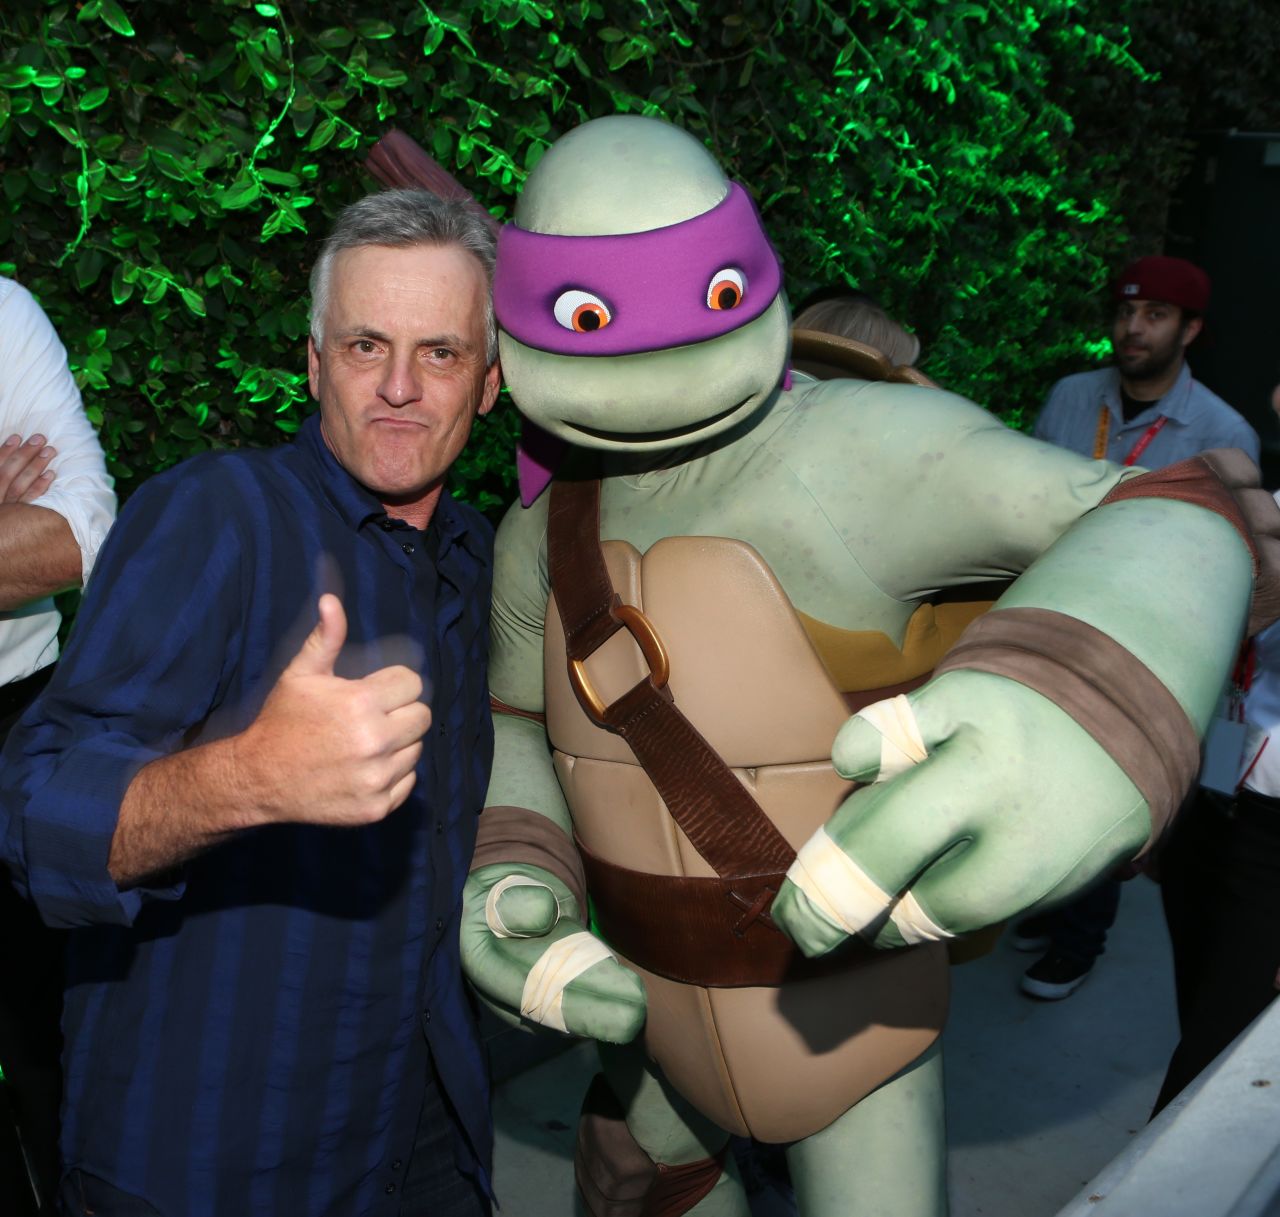 Rob Paulsen has been not one, but two "Teenage Mutant Ninja Turtles." In the 1980s, he was Raphael, and he's now playing Donatello on the Nickelodeon series. He was also two of the main characters on that 1990s favorite, "Animaniacs." He played Pinky, also on the show "Pinky and the Brain," and Wakko Warner -- just ask him to sing the "Geography Song."